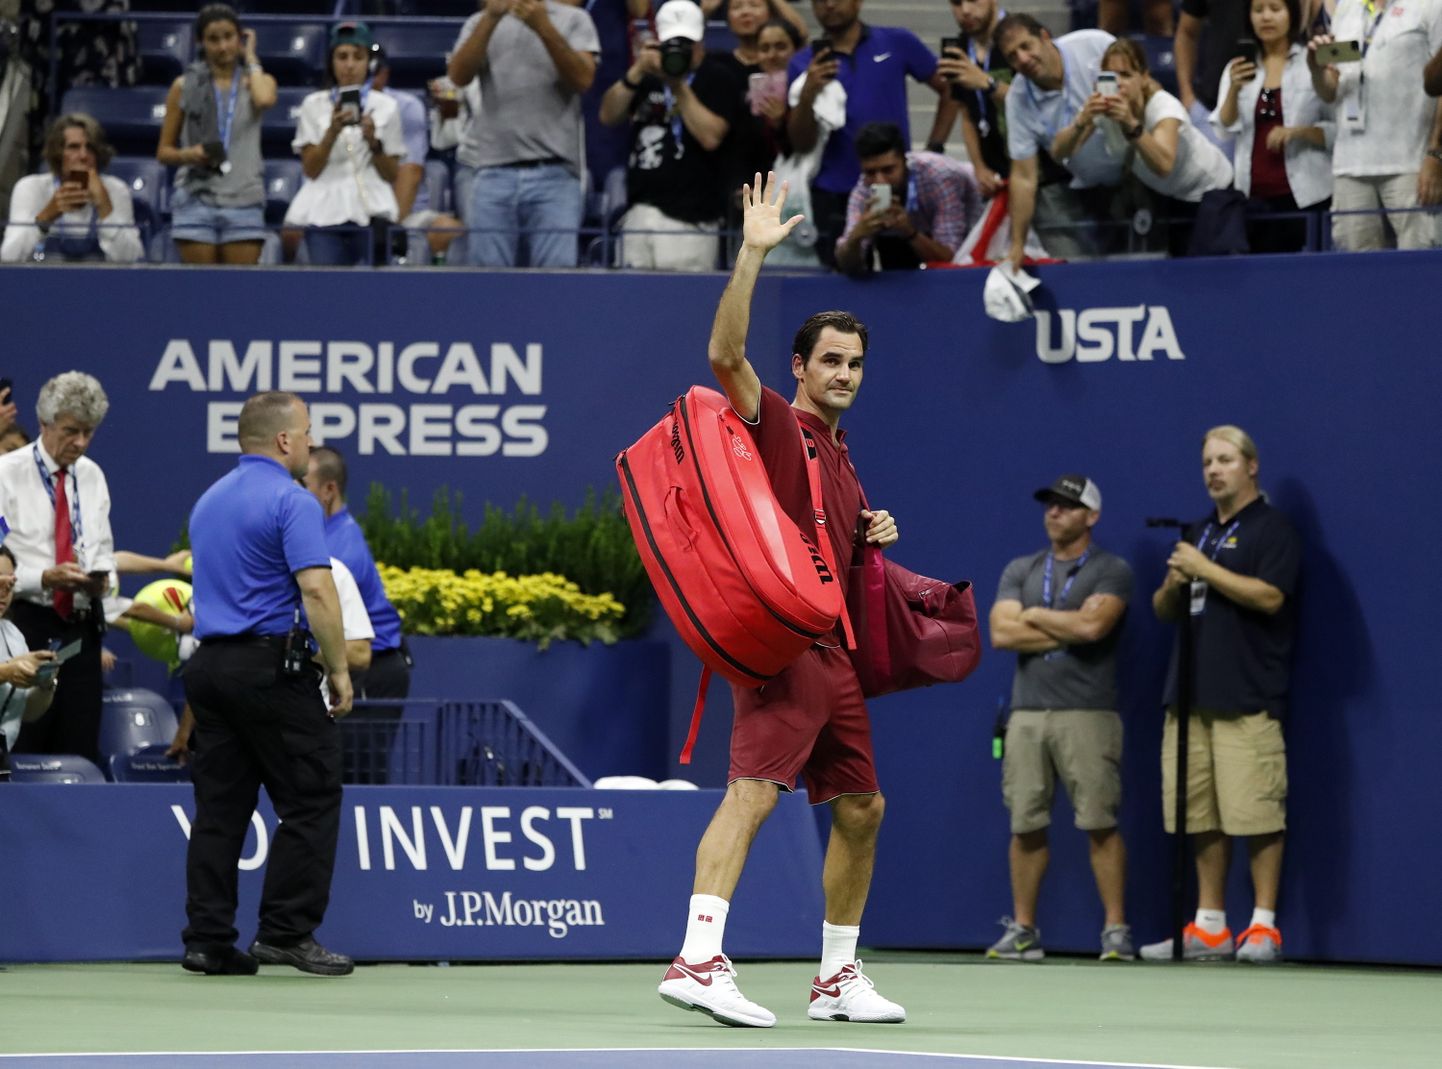 Roger Federer of Switzerland (C) waves to the crowd as he walks off court after losing his match against John Millman of Australia during the eighth day of the US Open Tennis Championships at the Arthur Ashe Stadium in the USTA National Tennis Center in Flushing Meadows, New York, USA, 03 September 2018. The US Open runs from 27 August through 09 September.  EPA/JASON SZENES